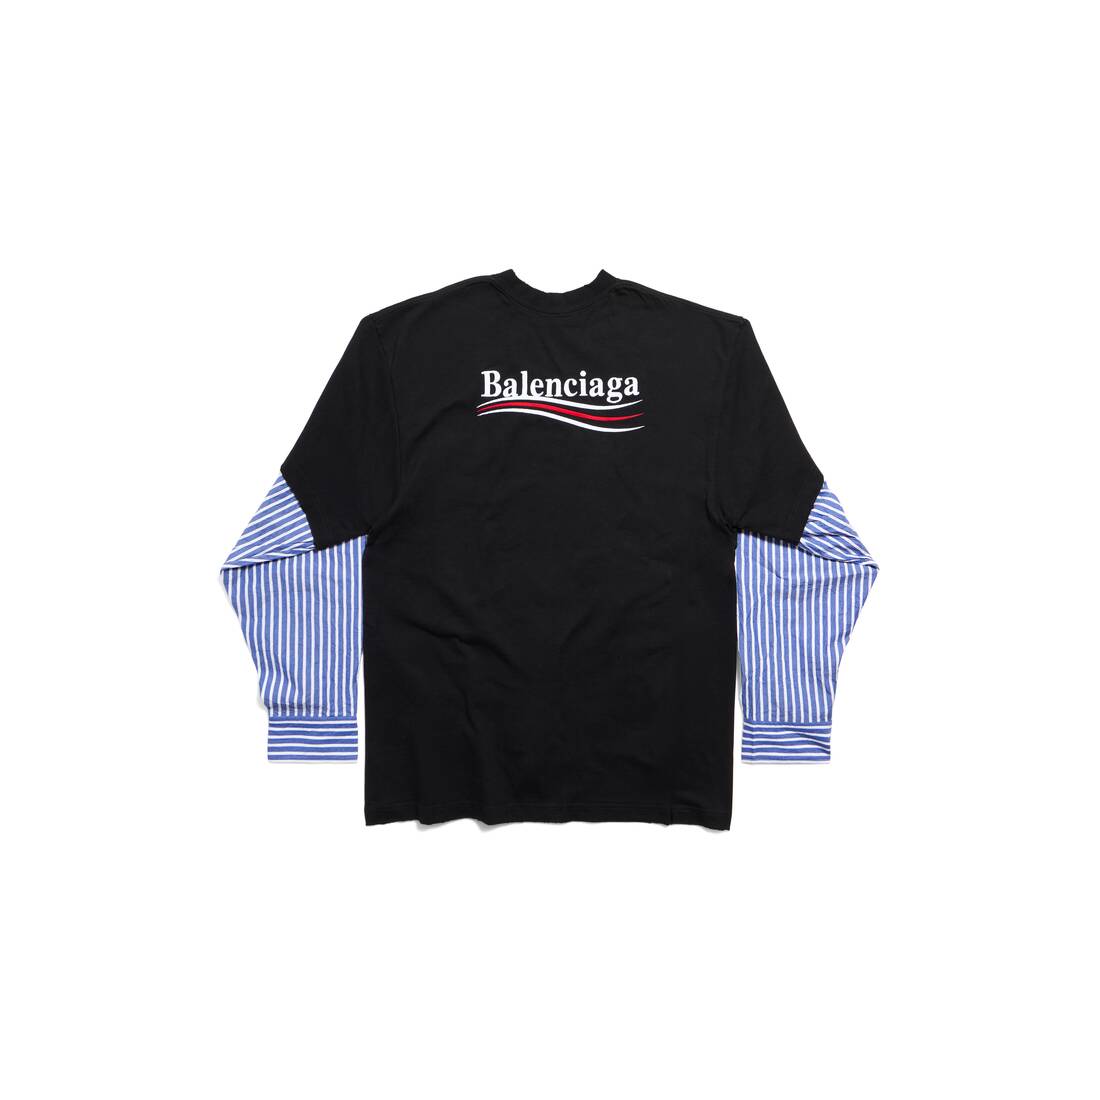 Men's Political Campaign Layered T-shirt in Black